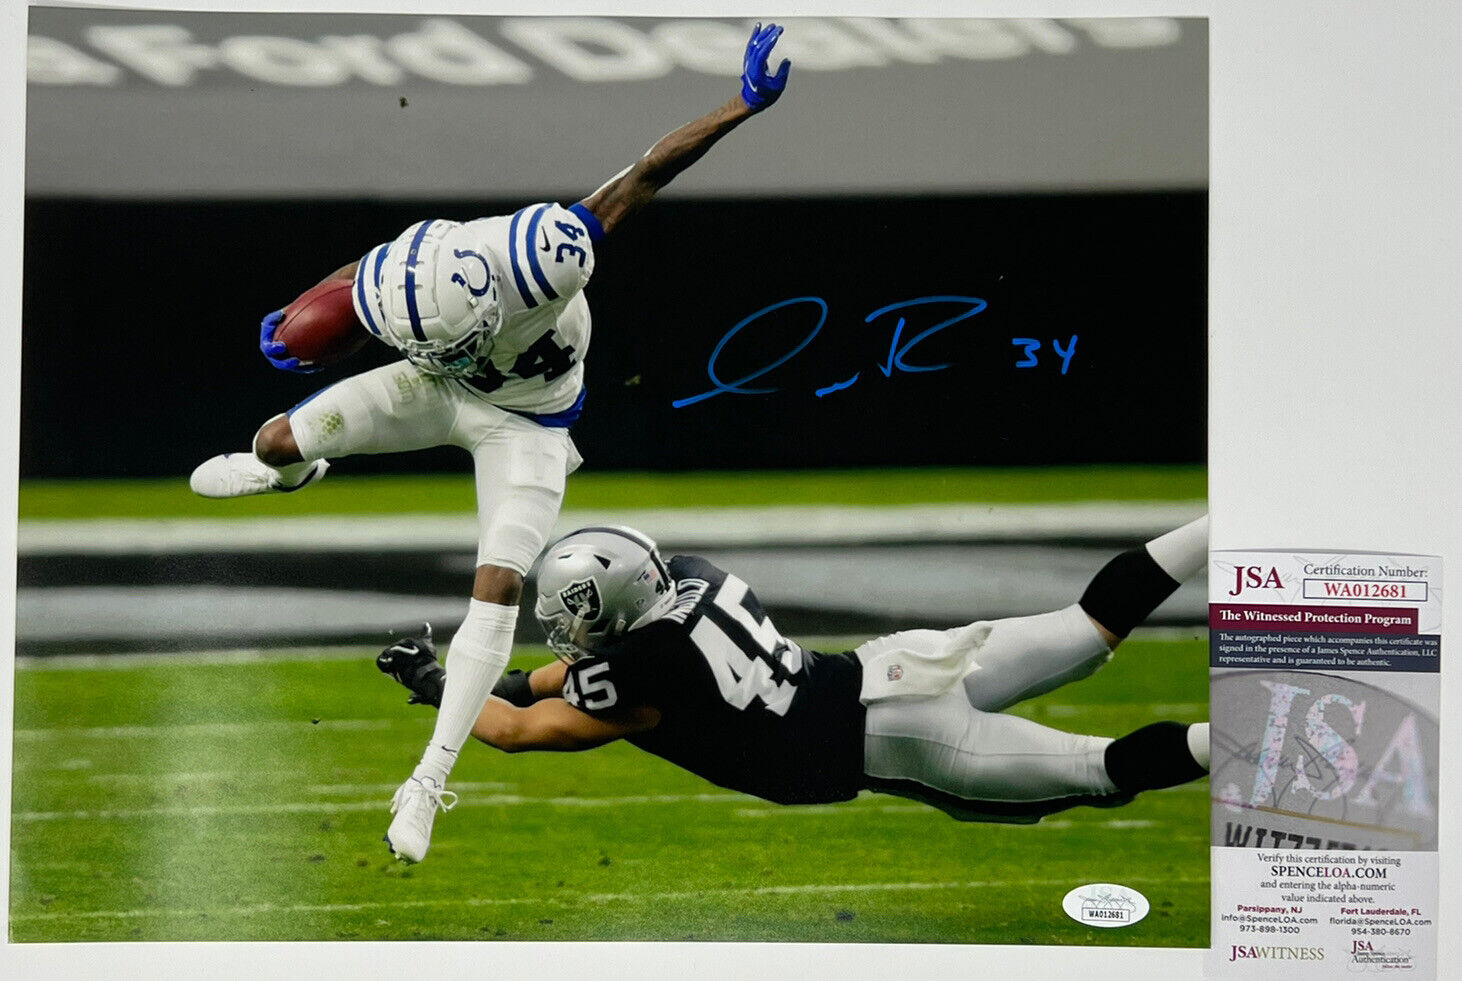 Isaiah Rodgers Autographed Hand Signed Indianapolis Colts 11x14 Photo w/ JSA COA